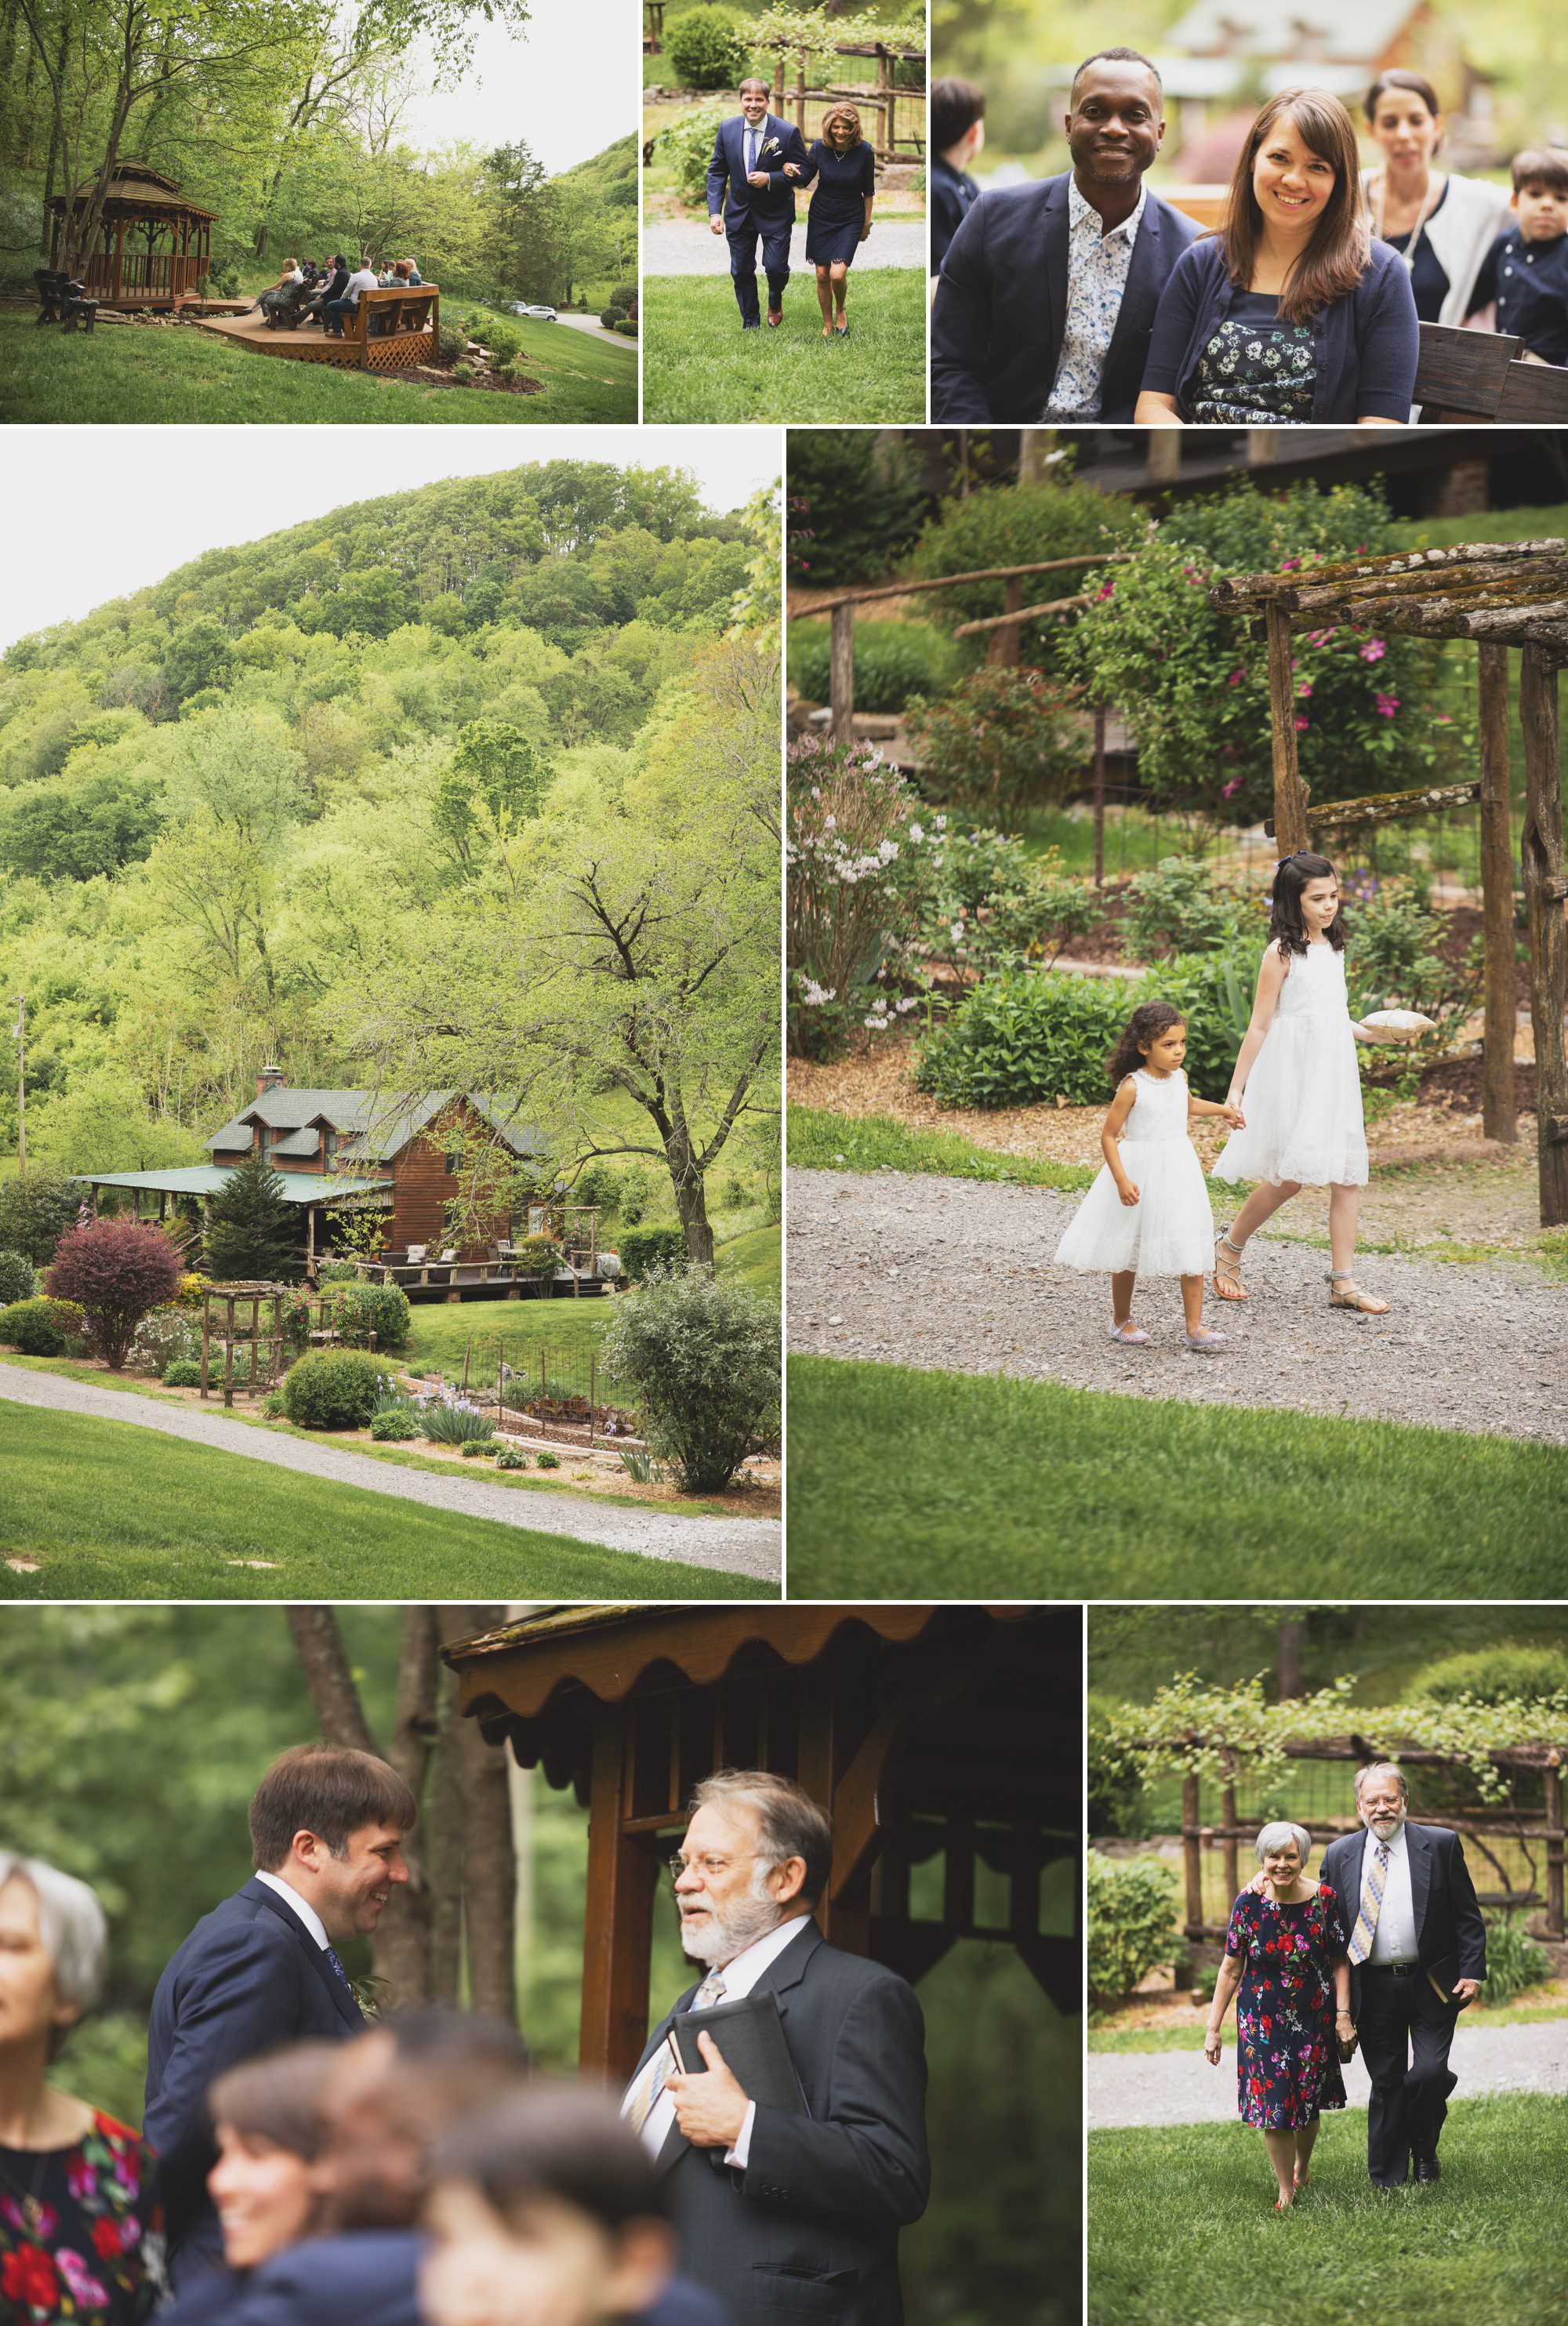 Wedding processional before elopement wedding ceremony at Butterfly Hollow in Gordonsville, TN. Photos by Krista Lee Photography. 